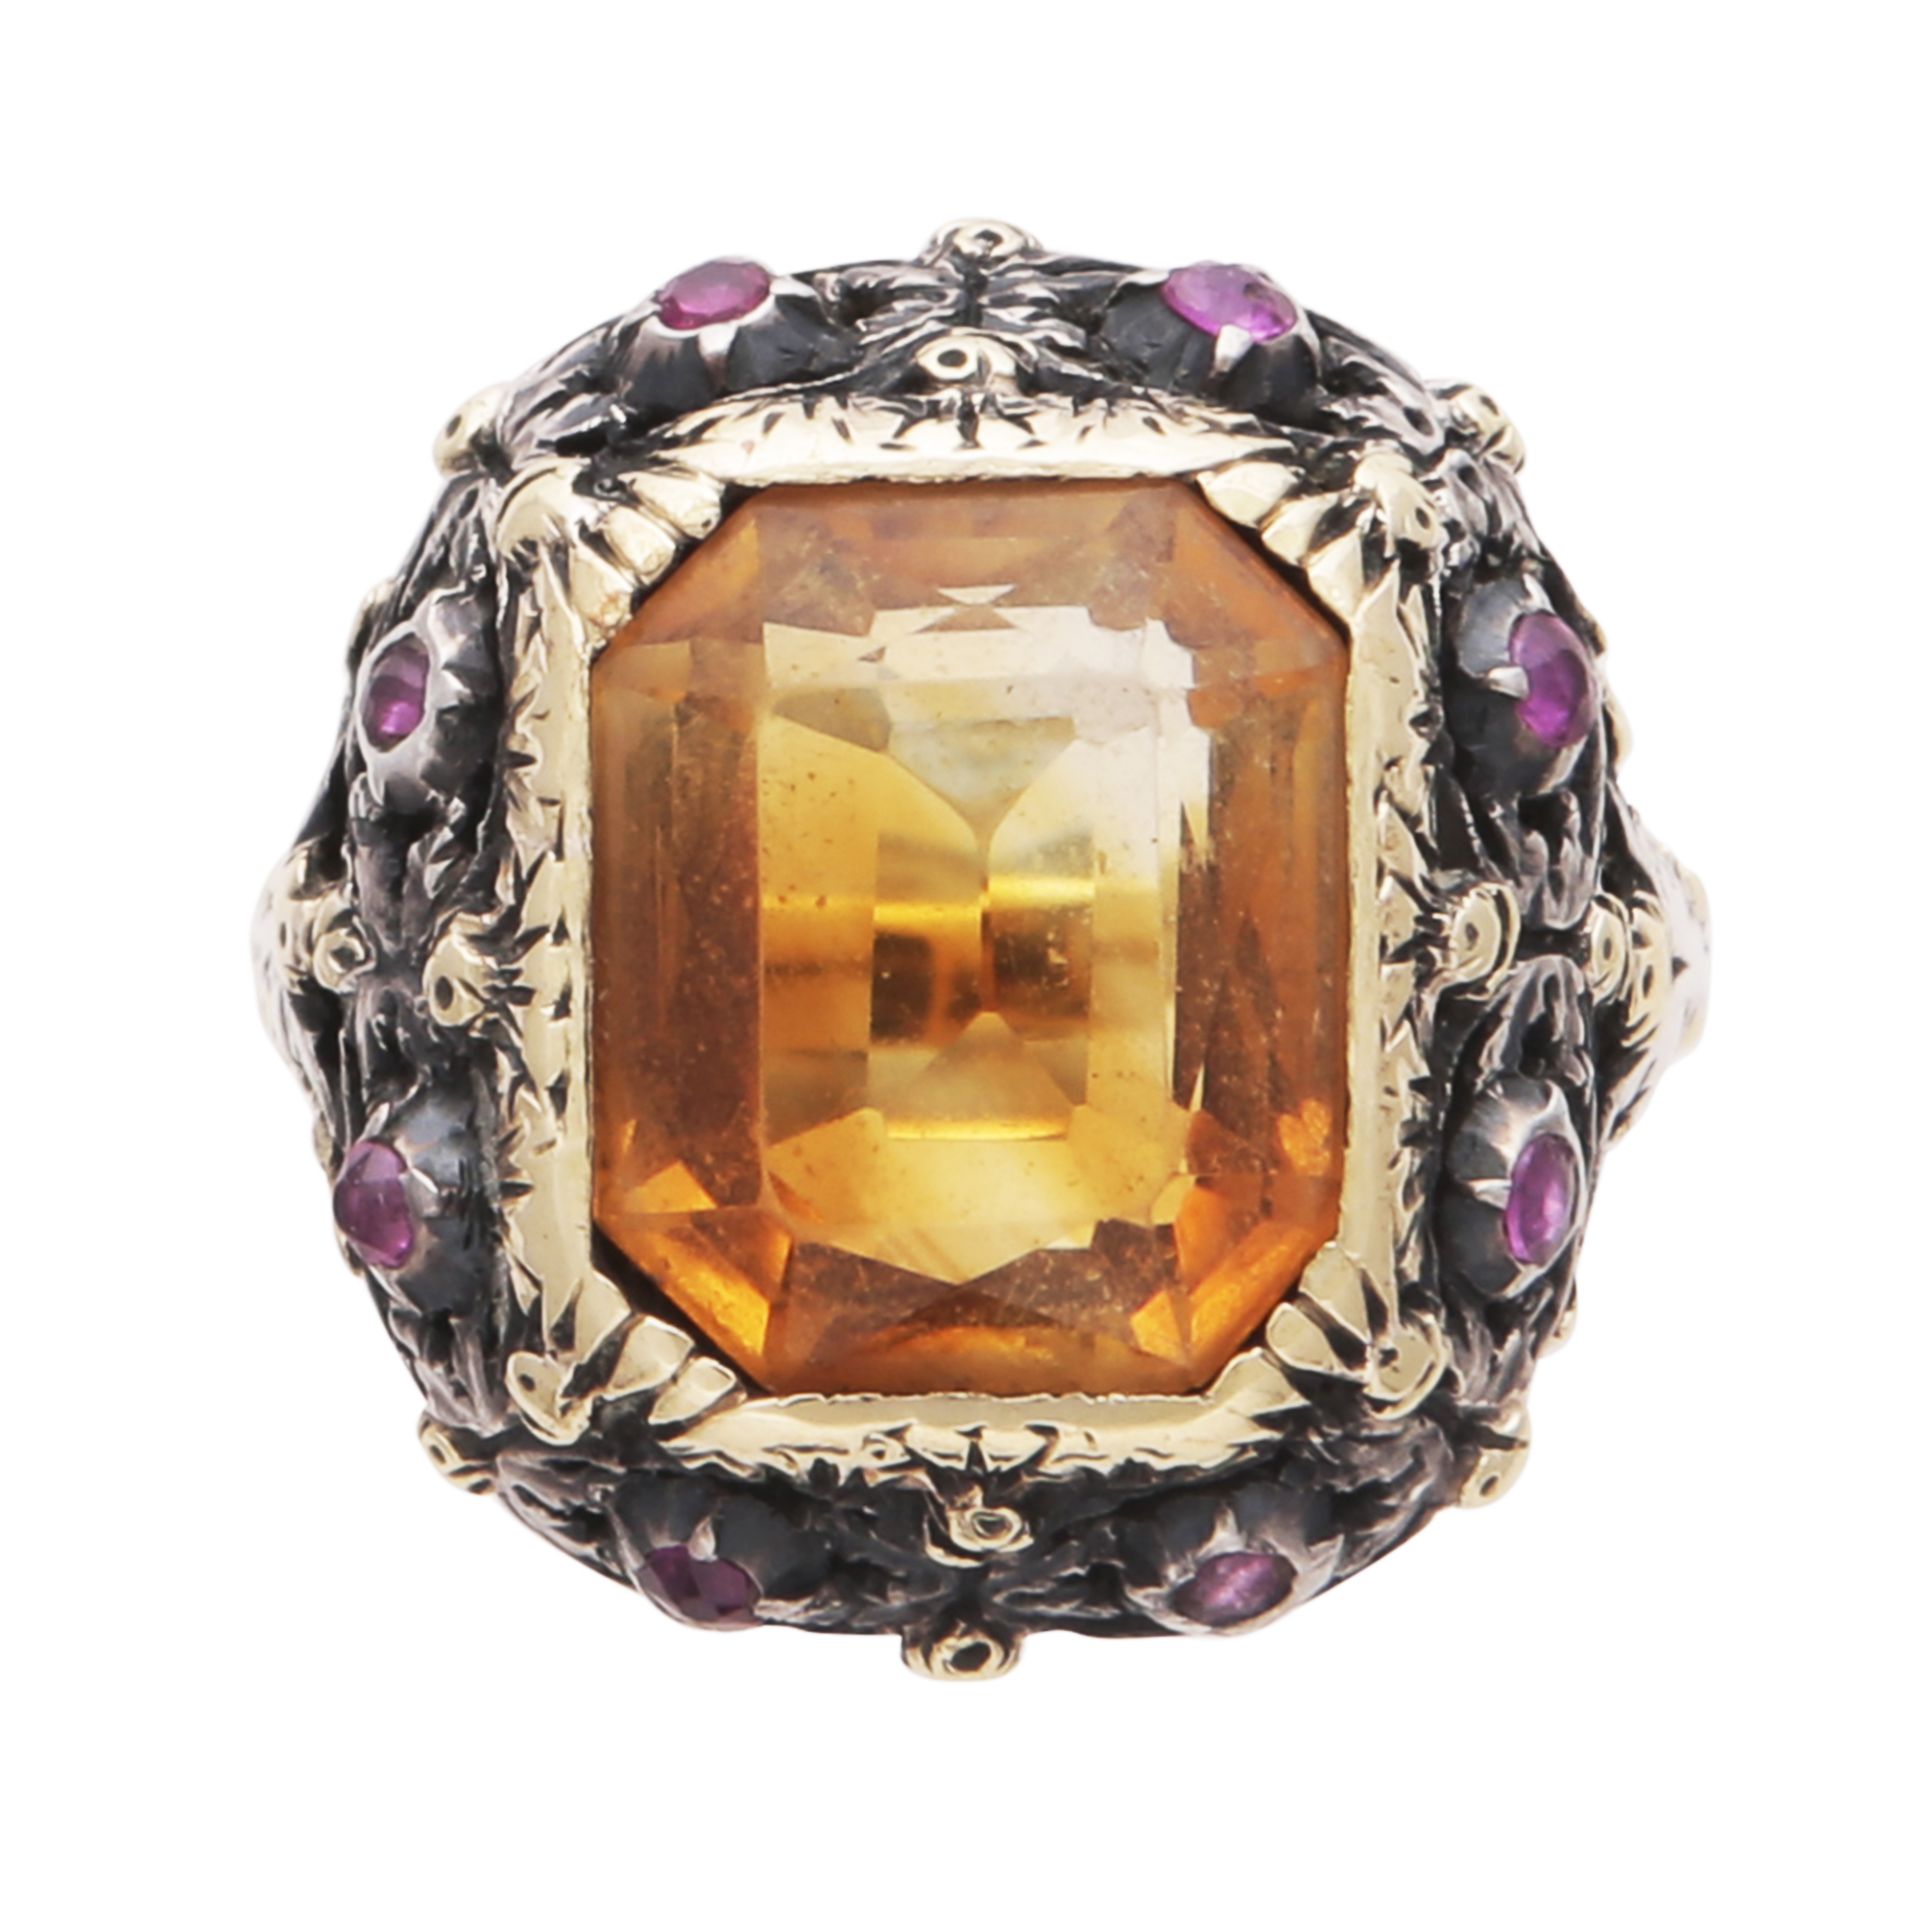 A citrine and ruby dress ring in high carat gold, designed as a large, emerald / scissor cut citrine